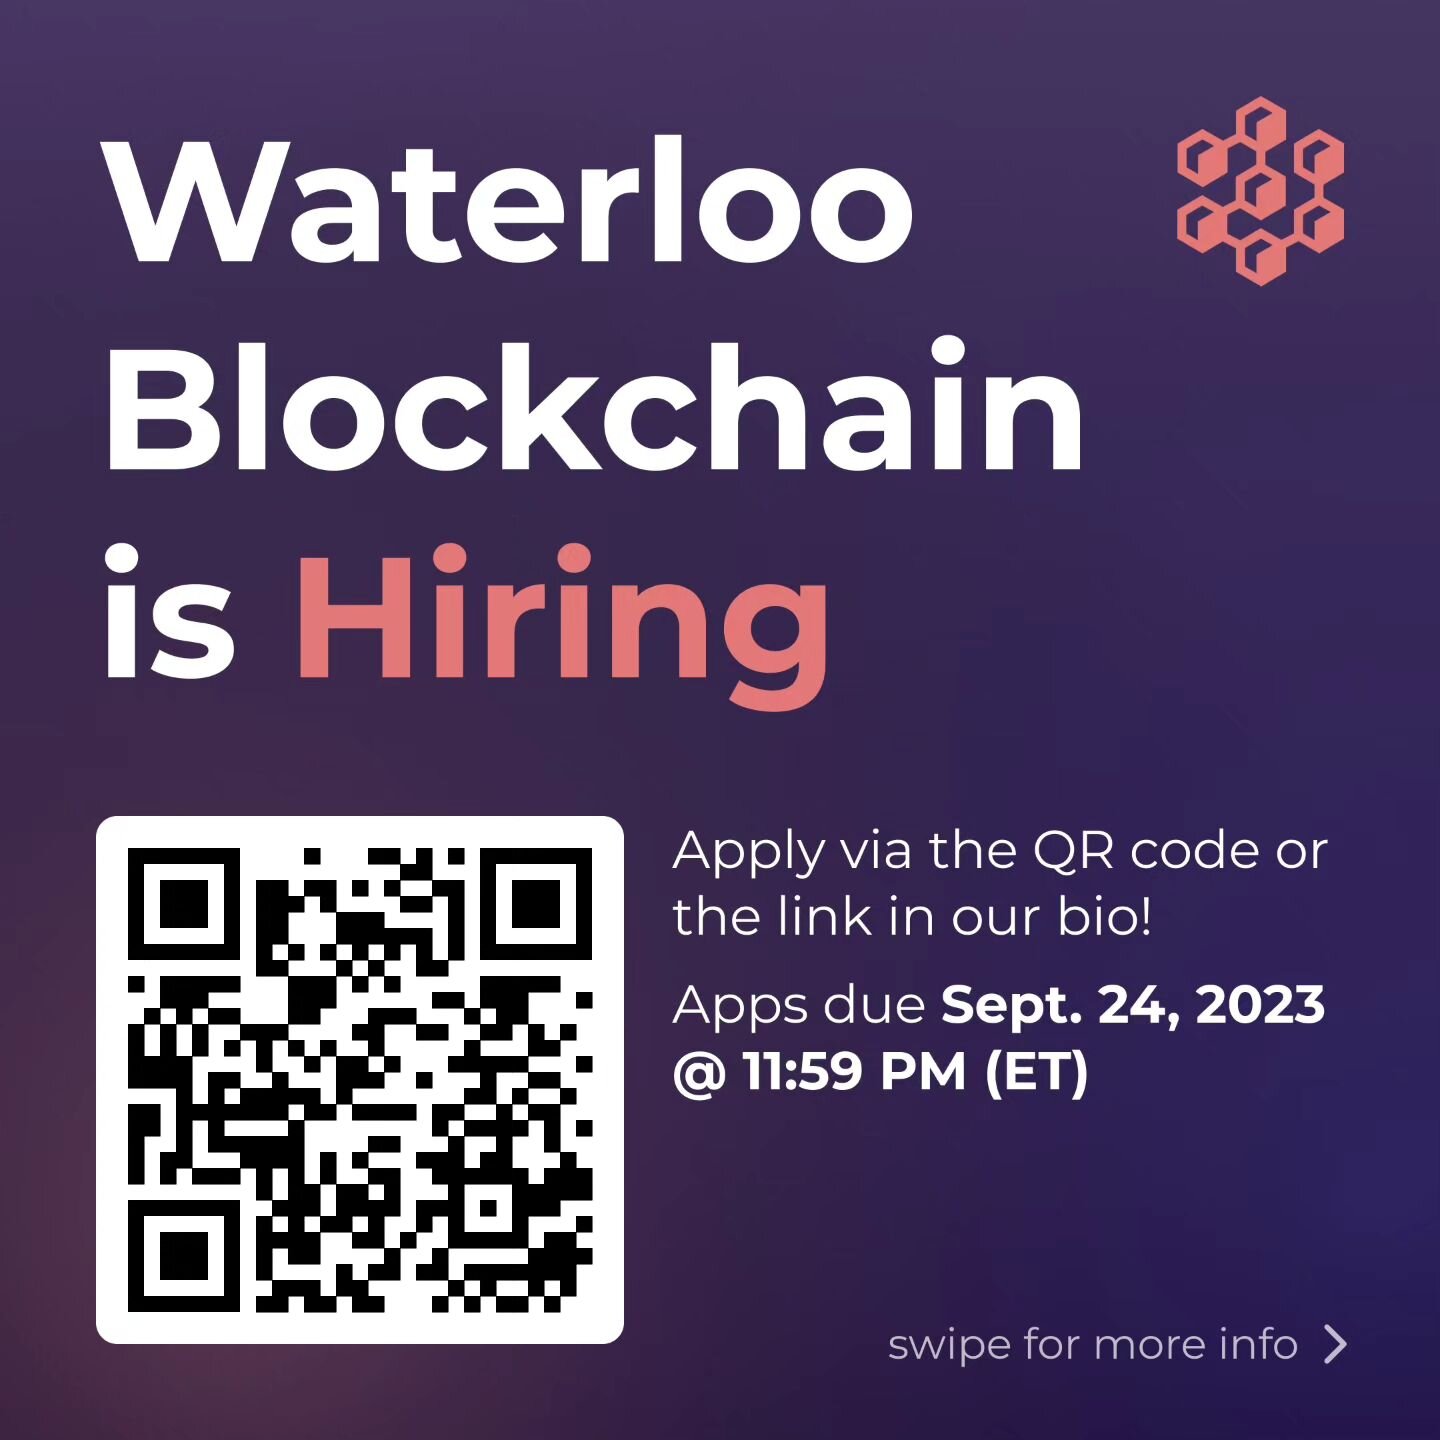 ‼️ We have open positions for Fall 2023 ‼️

🔥 Free travel? Exclusive team swag? Network with industry leaders? These are a few of the many reasons to apply and become part of the Waterloo Blockchain team! 

👀 Swipe right or click the link in the bi